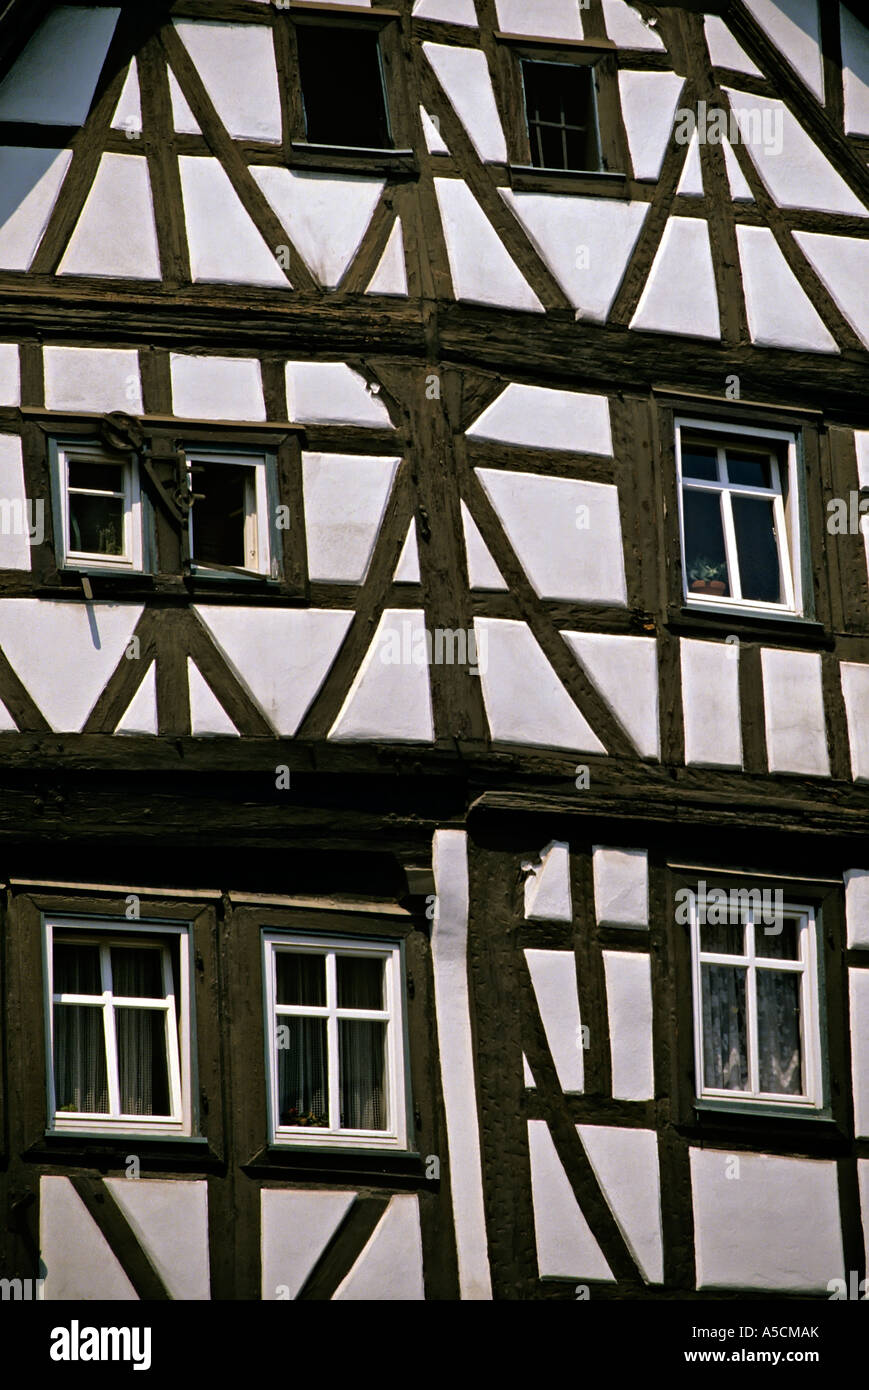 Palmsches Haus High Resolution Stock Photography and Images - Alamy